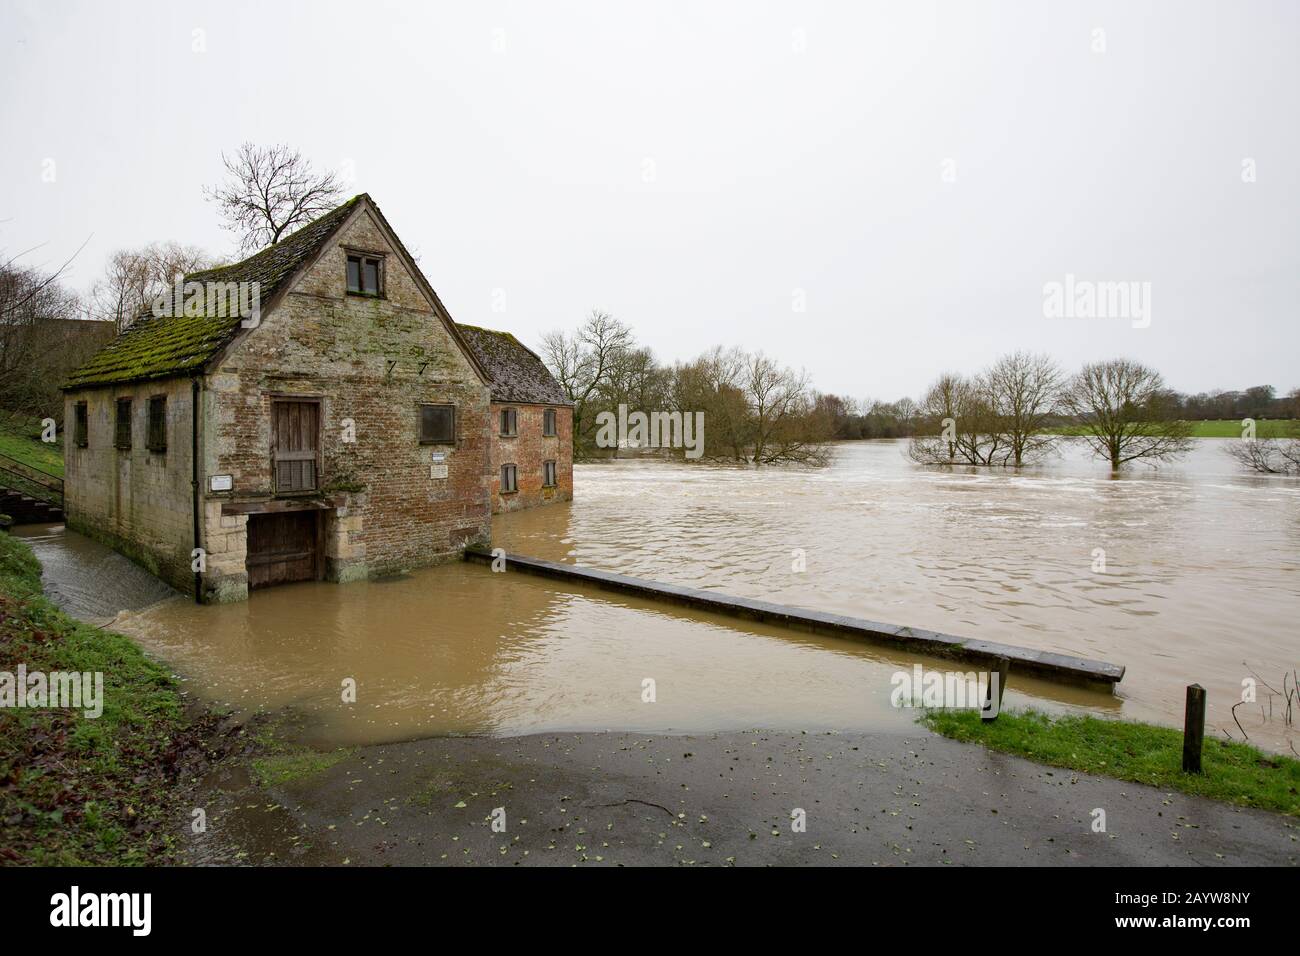 The Dorset Stour river flooding at Sturminster Mill after heavy rains caused by Storm Dennis. The storm arrived on 15.02.2020 and caused widespread fl Stock Photo